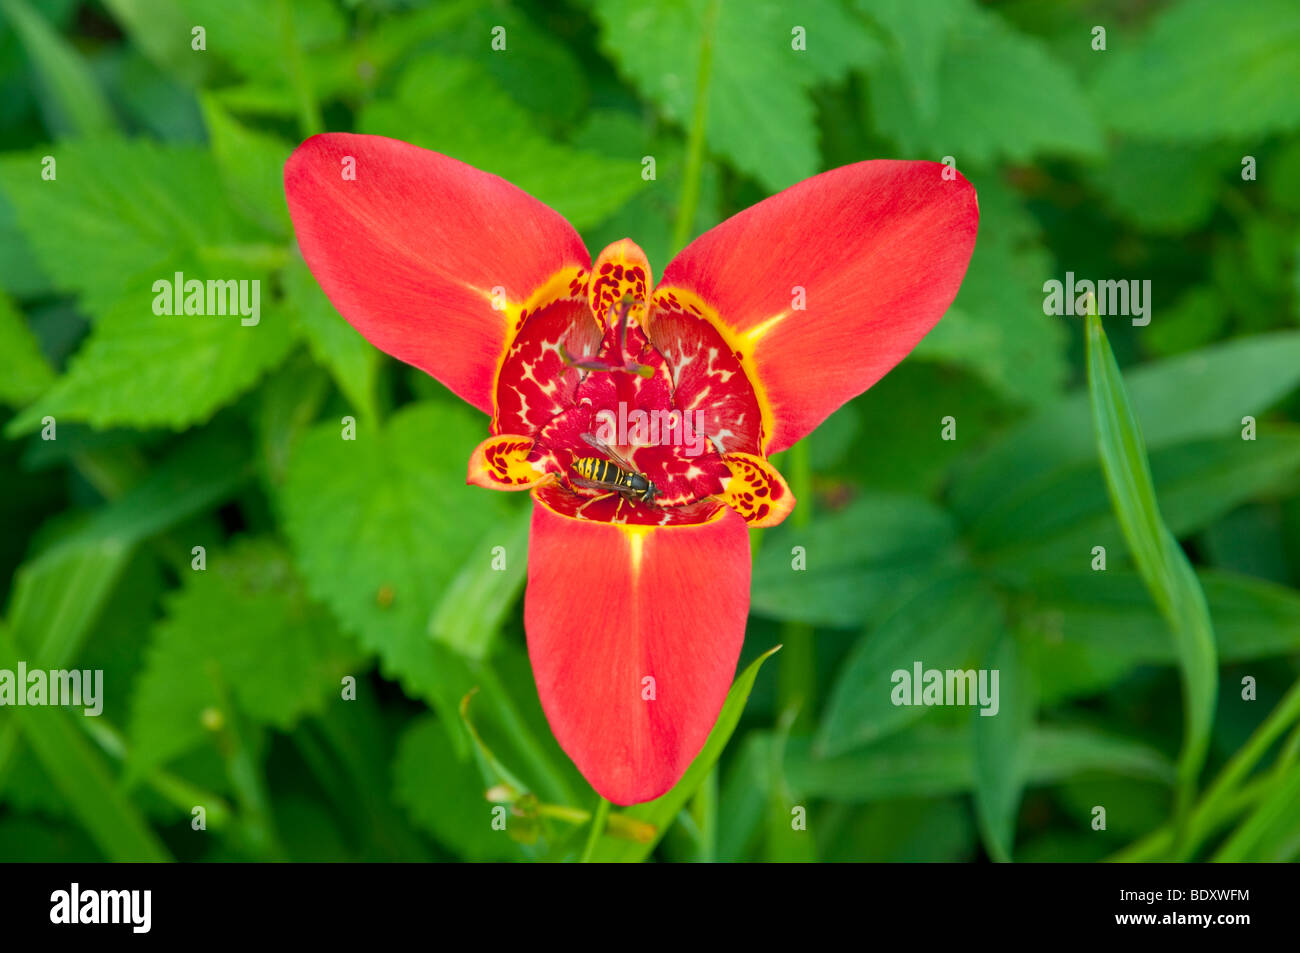 Closeups of a red Mexican Shell flower in the English Gardens of the Assiniboine Park in Winnipeg, Manitoba, Canada. Stock Photo